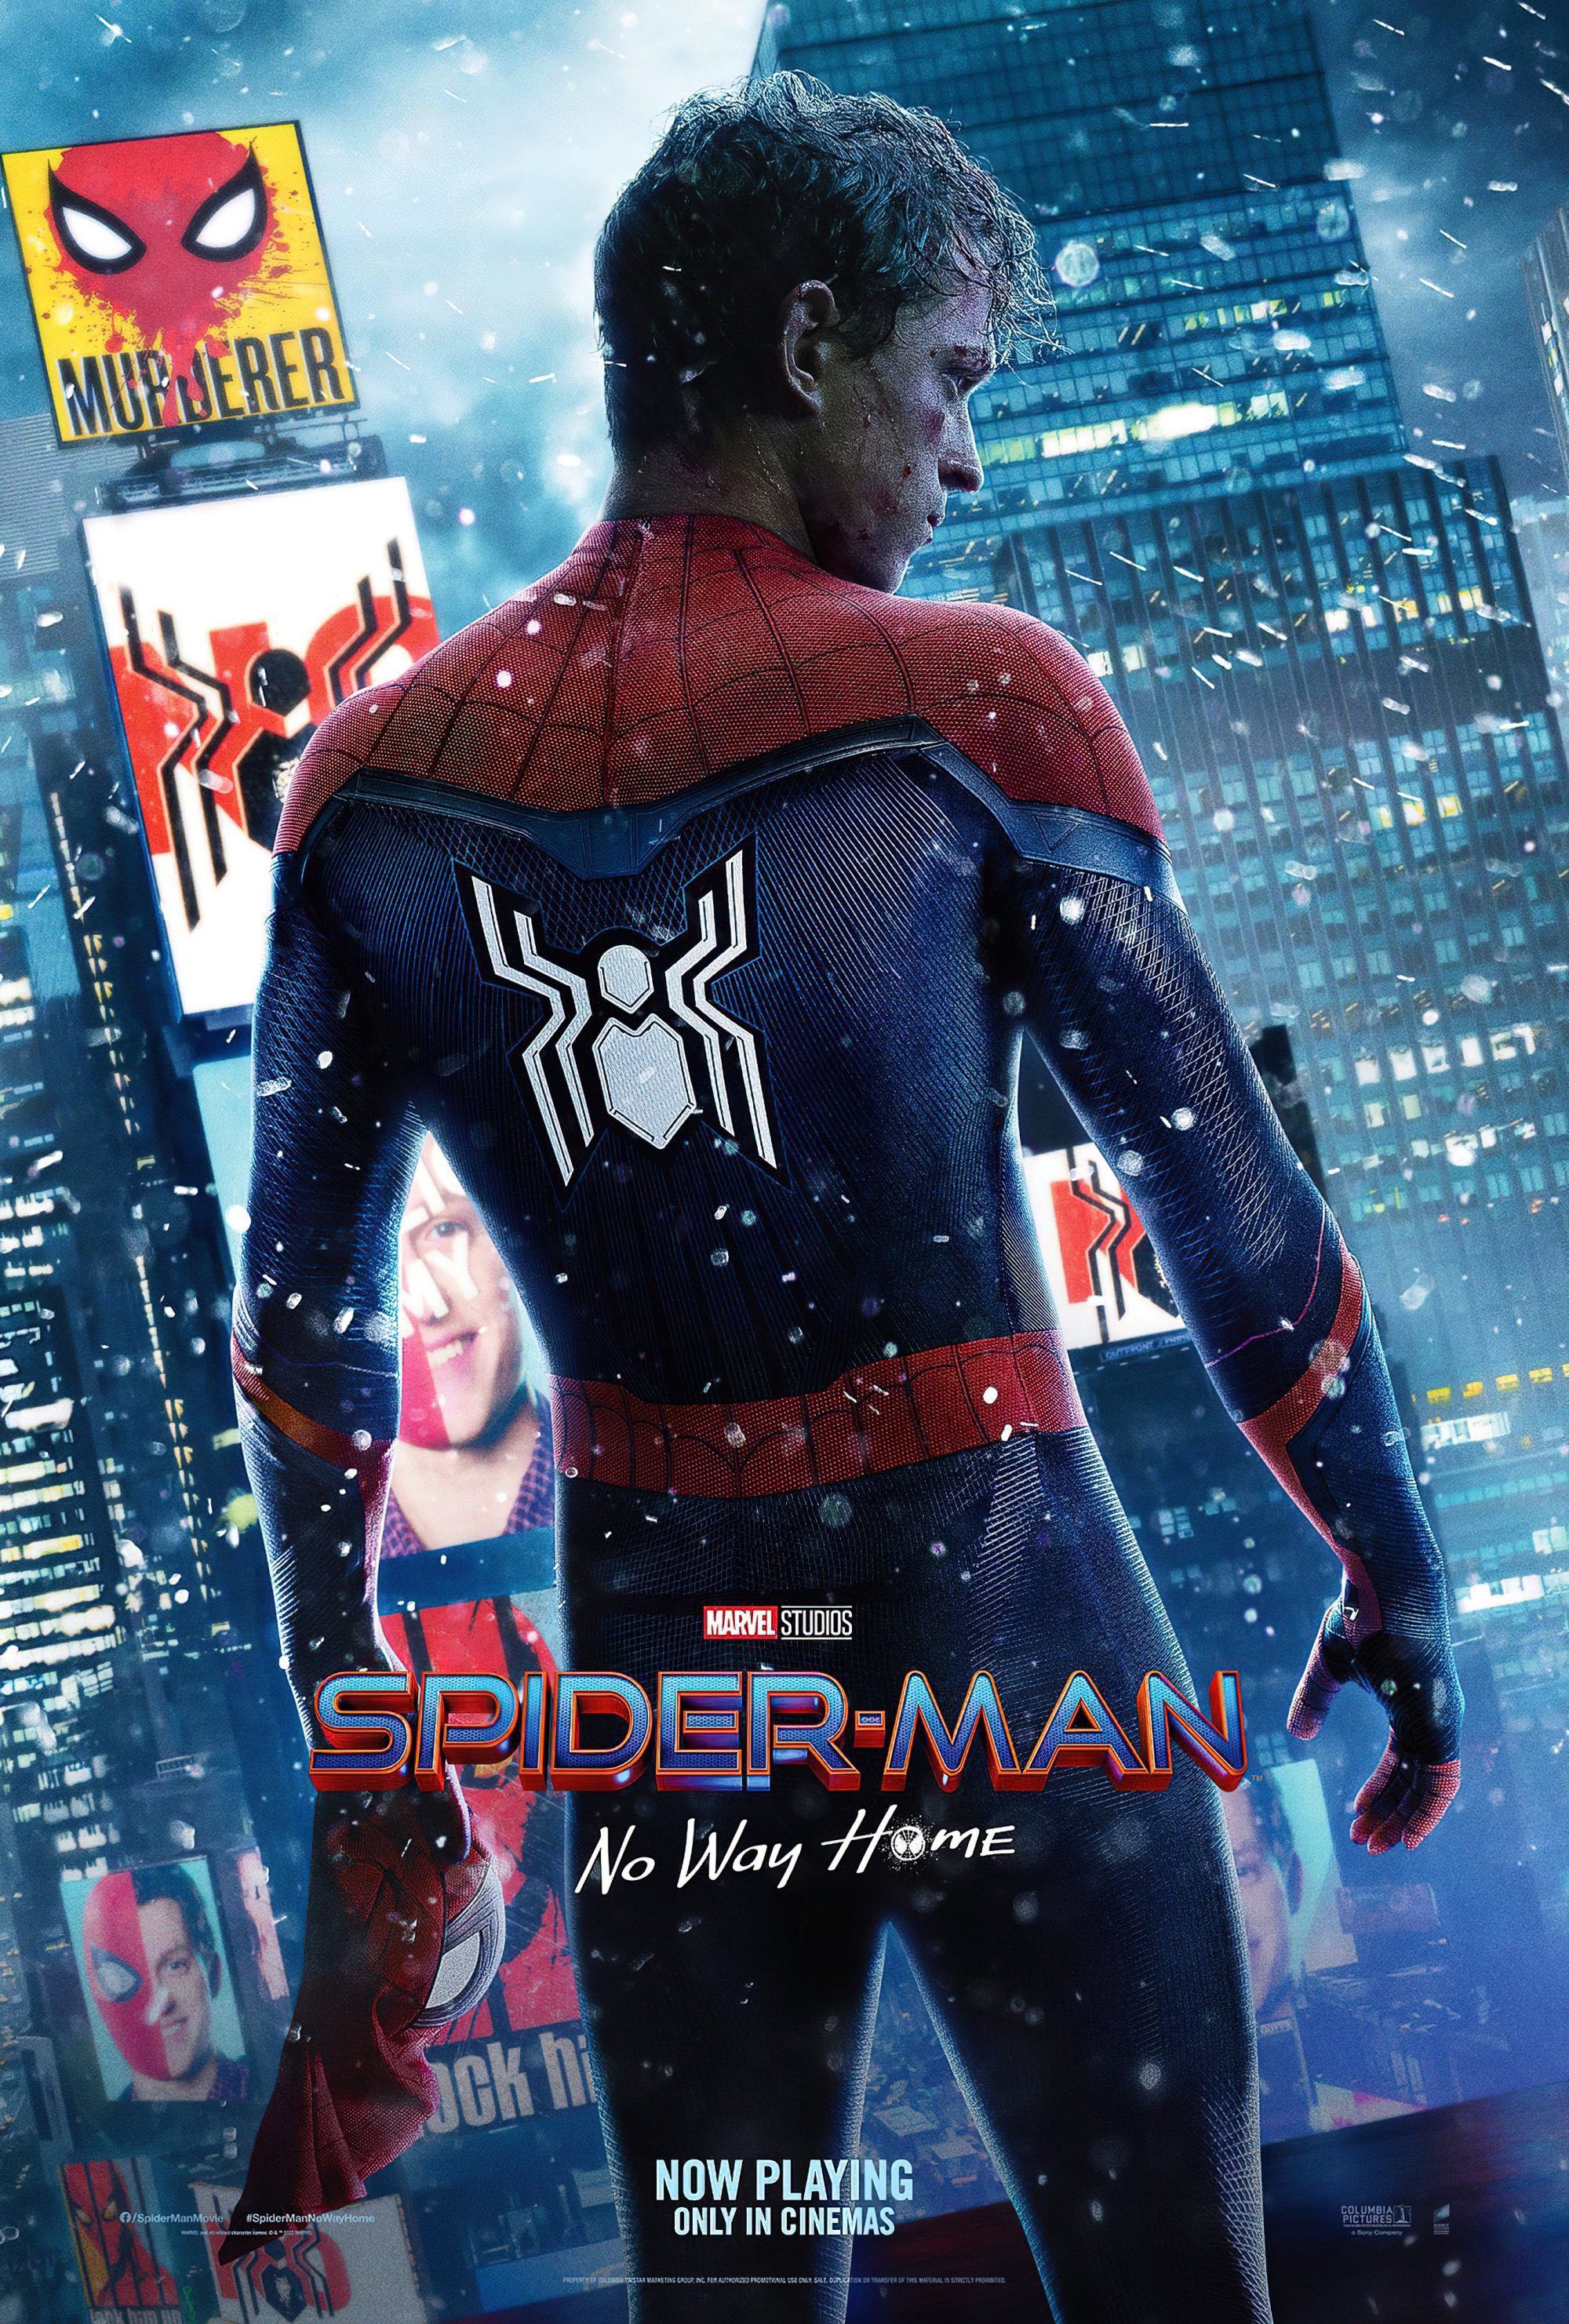 Spider-Man Stands Over Times Square in New No Way Home Poster